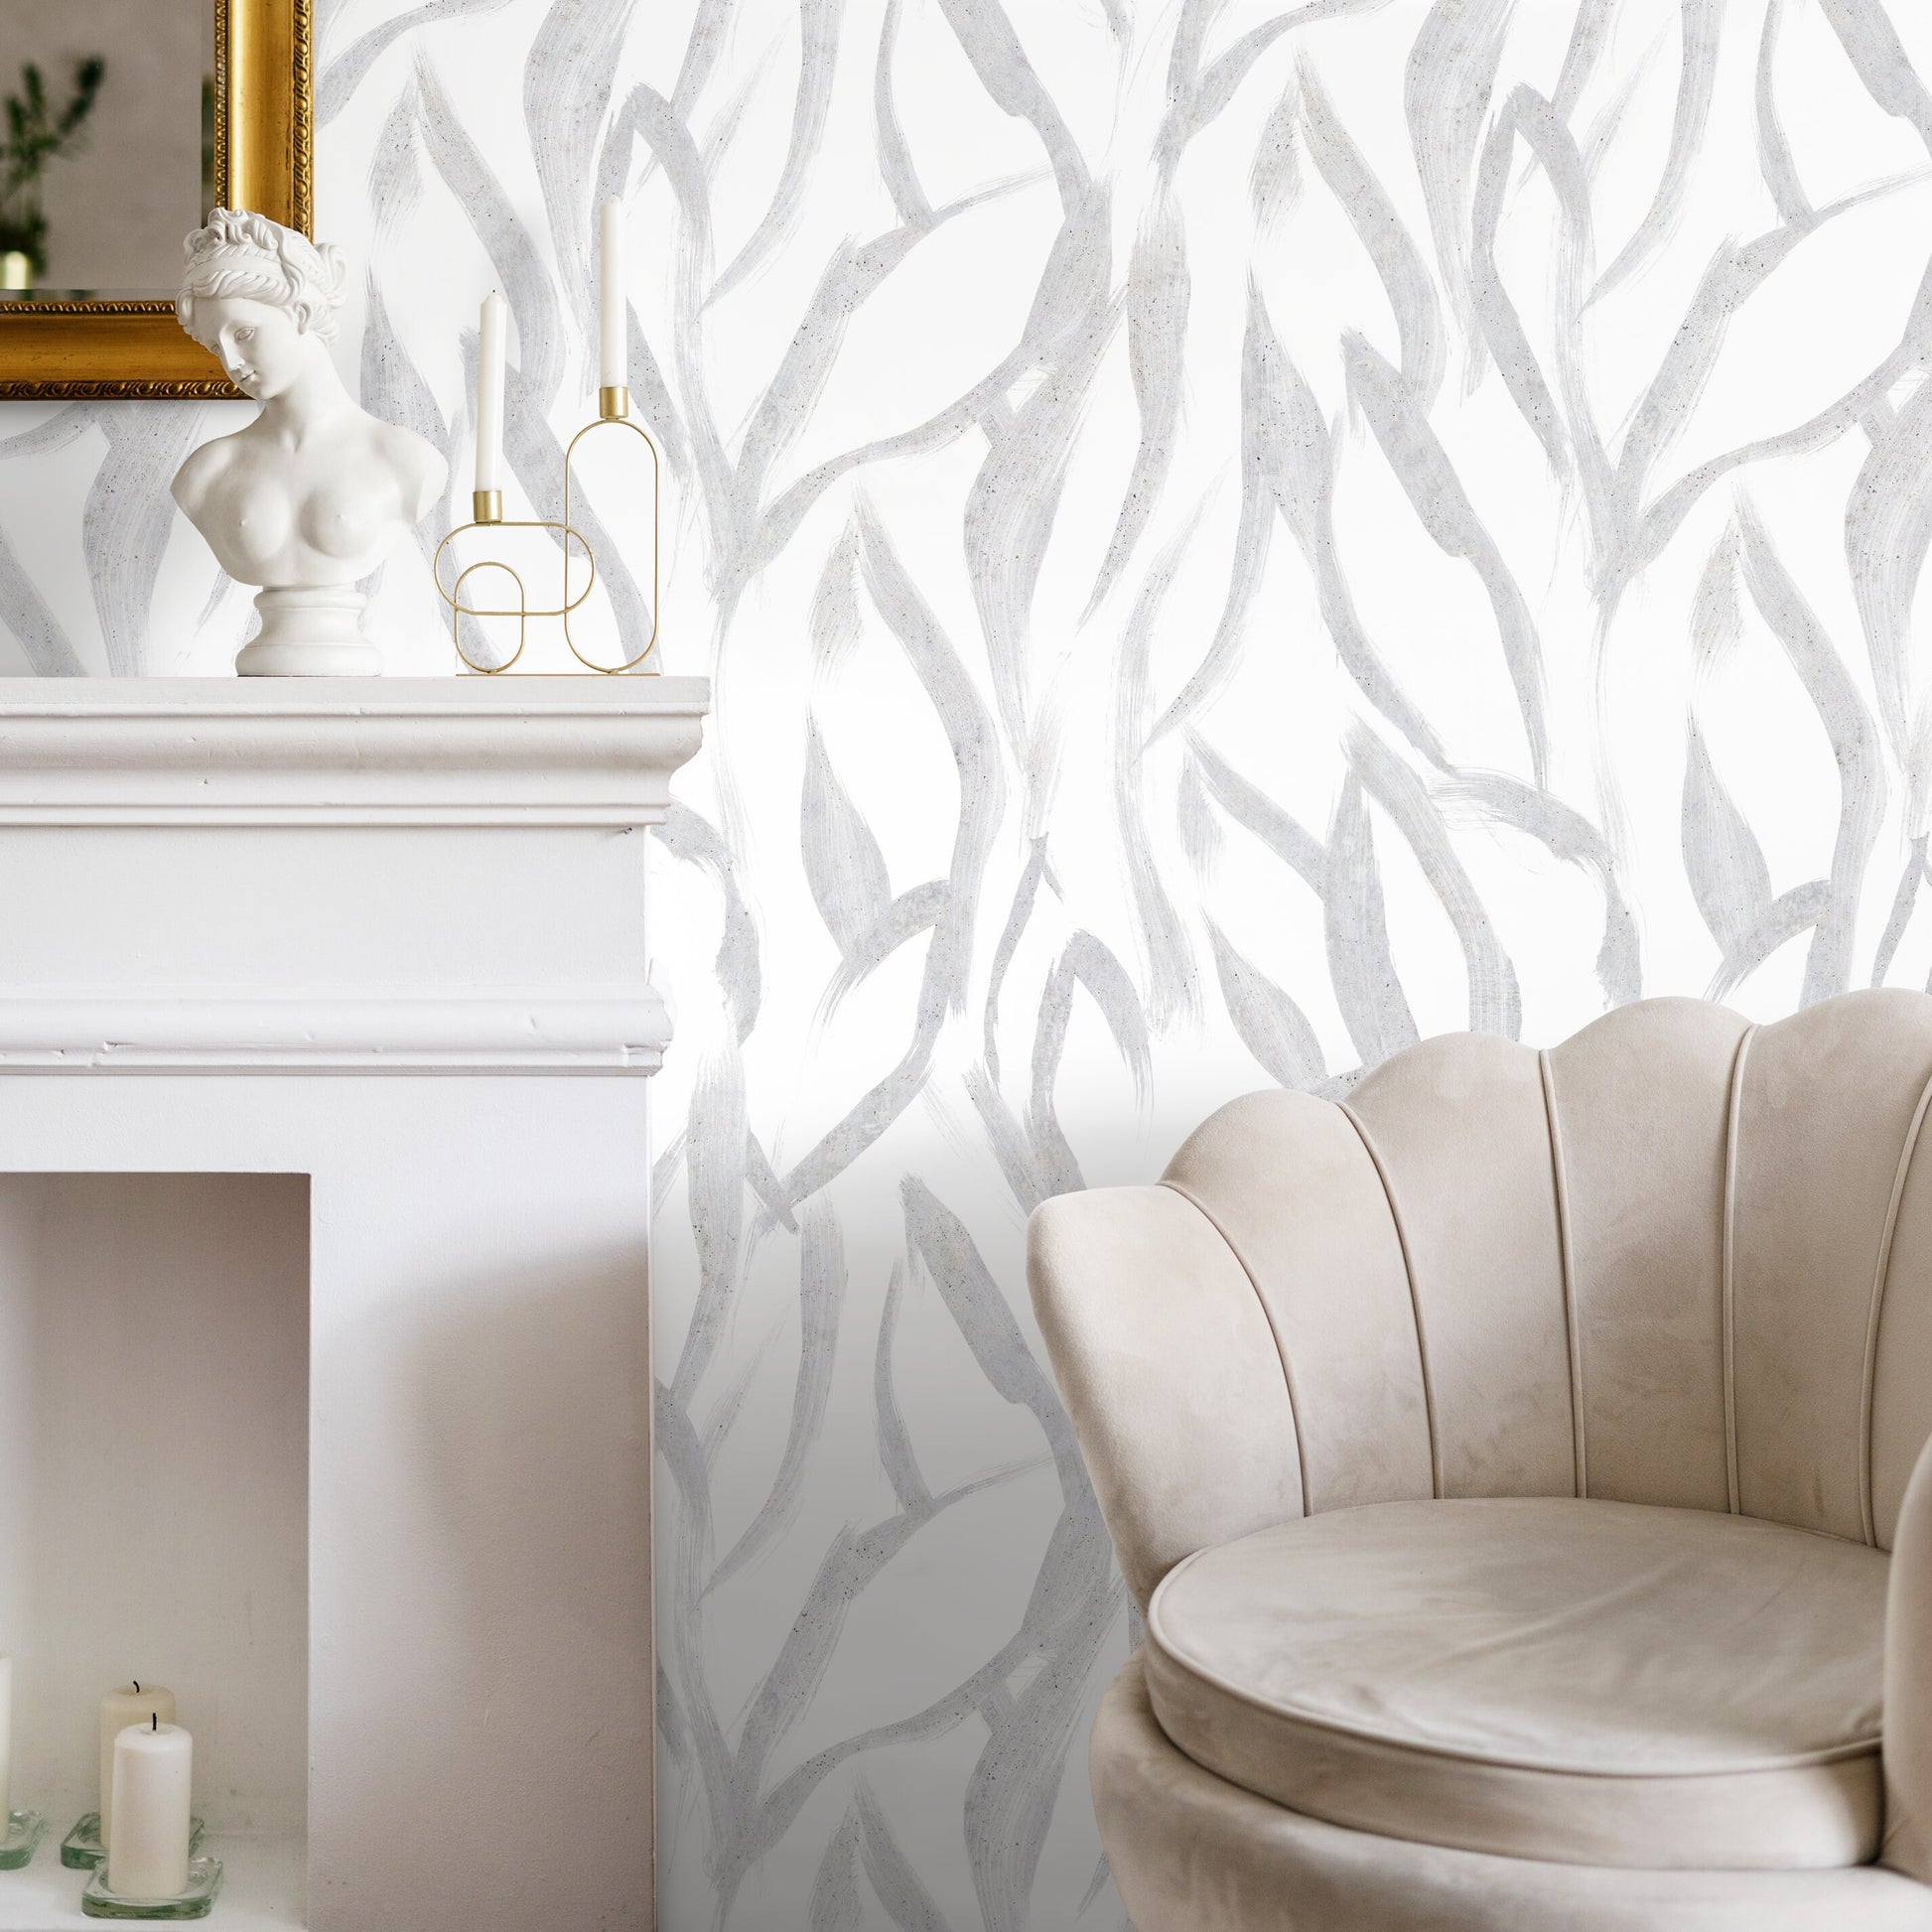 Gray Abstract Leaf Wallpaper / Peel and Stick Wallpaper Removable Wallpaper Home Decor Wall Art Wall Decor Room Decor - C900